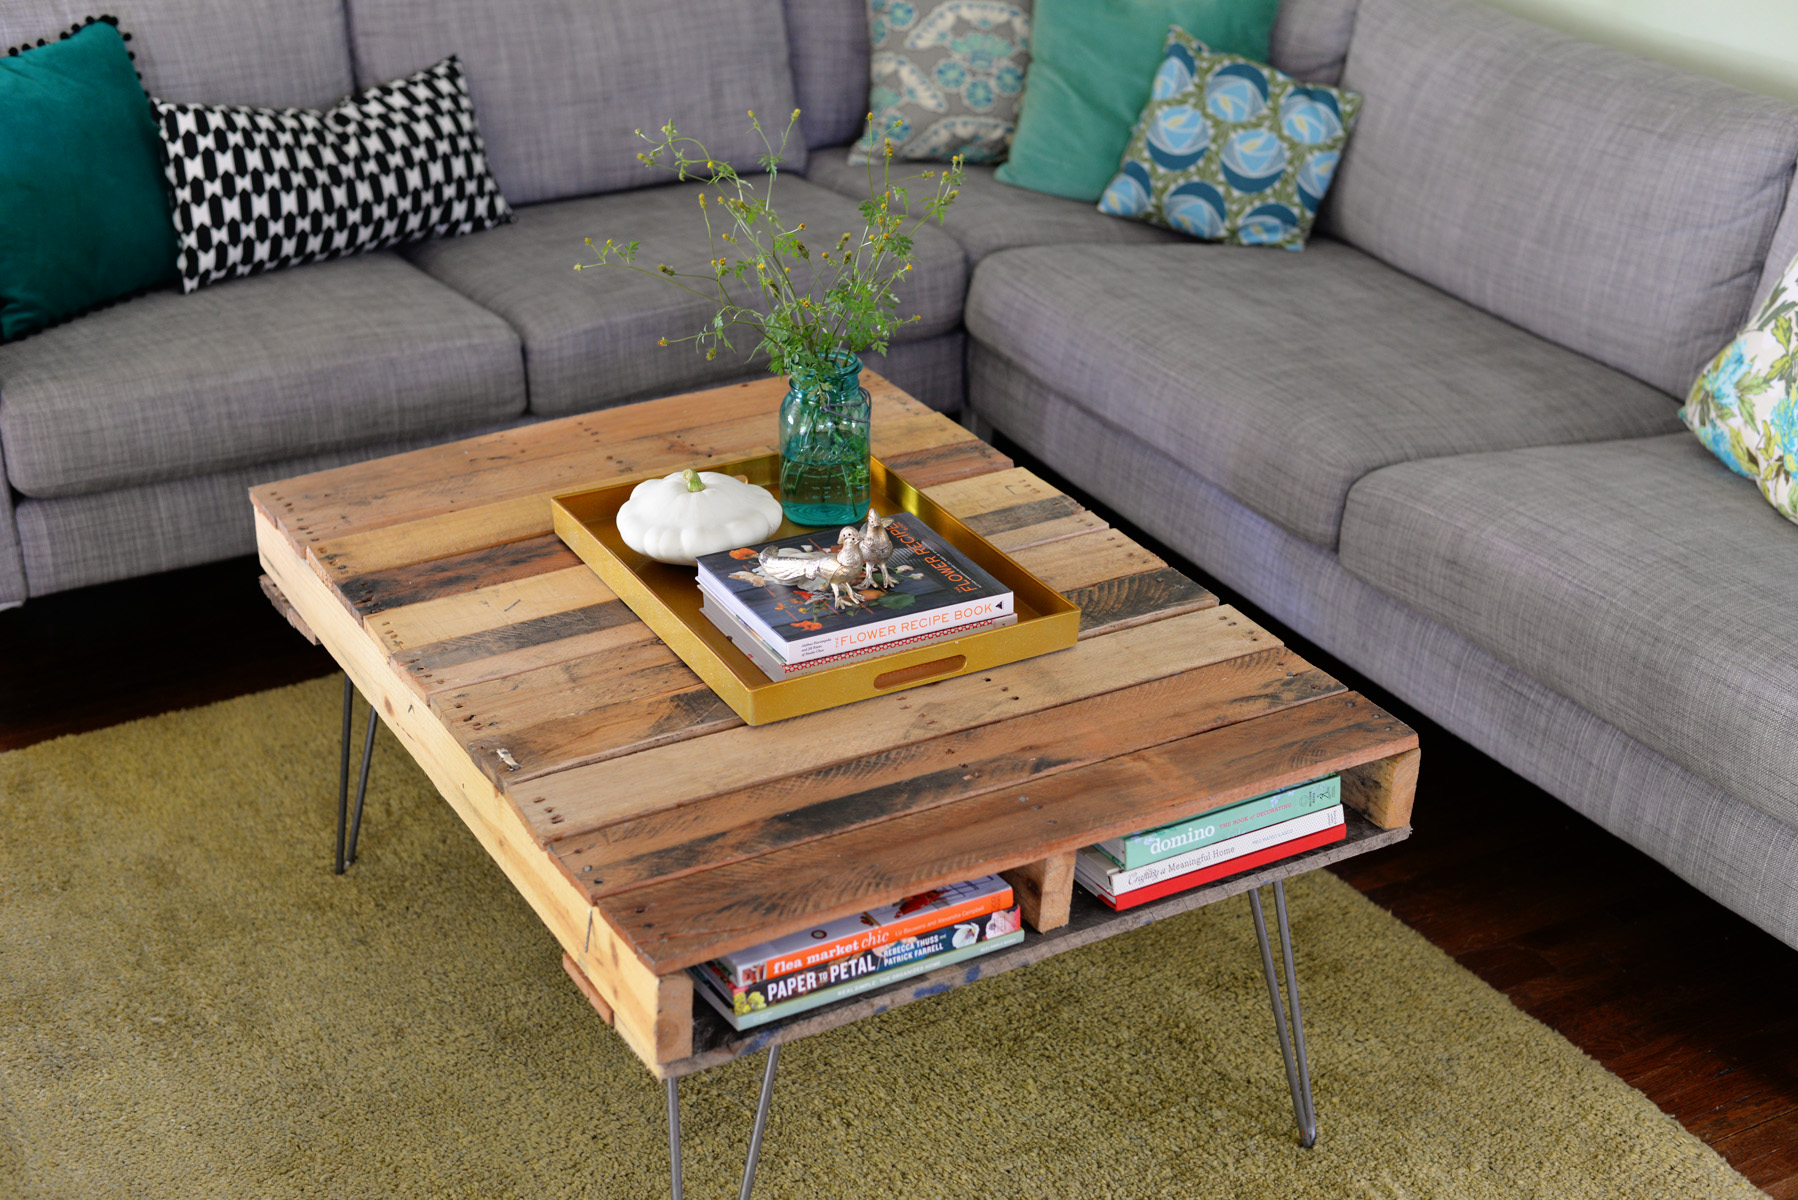 Pallet Table Lookbook with a DIY Pallet Coffee Table Tutorial